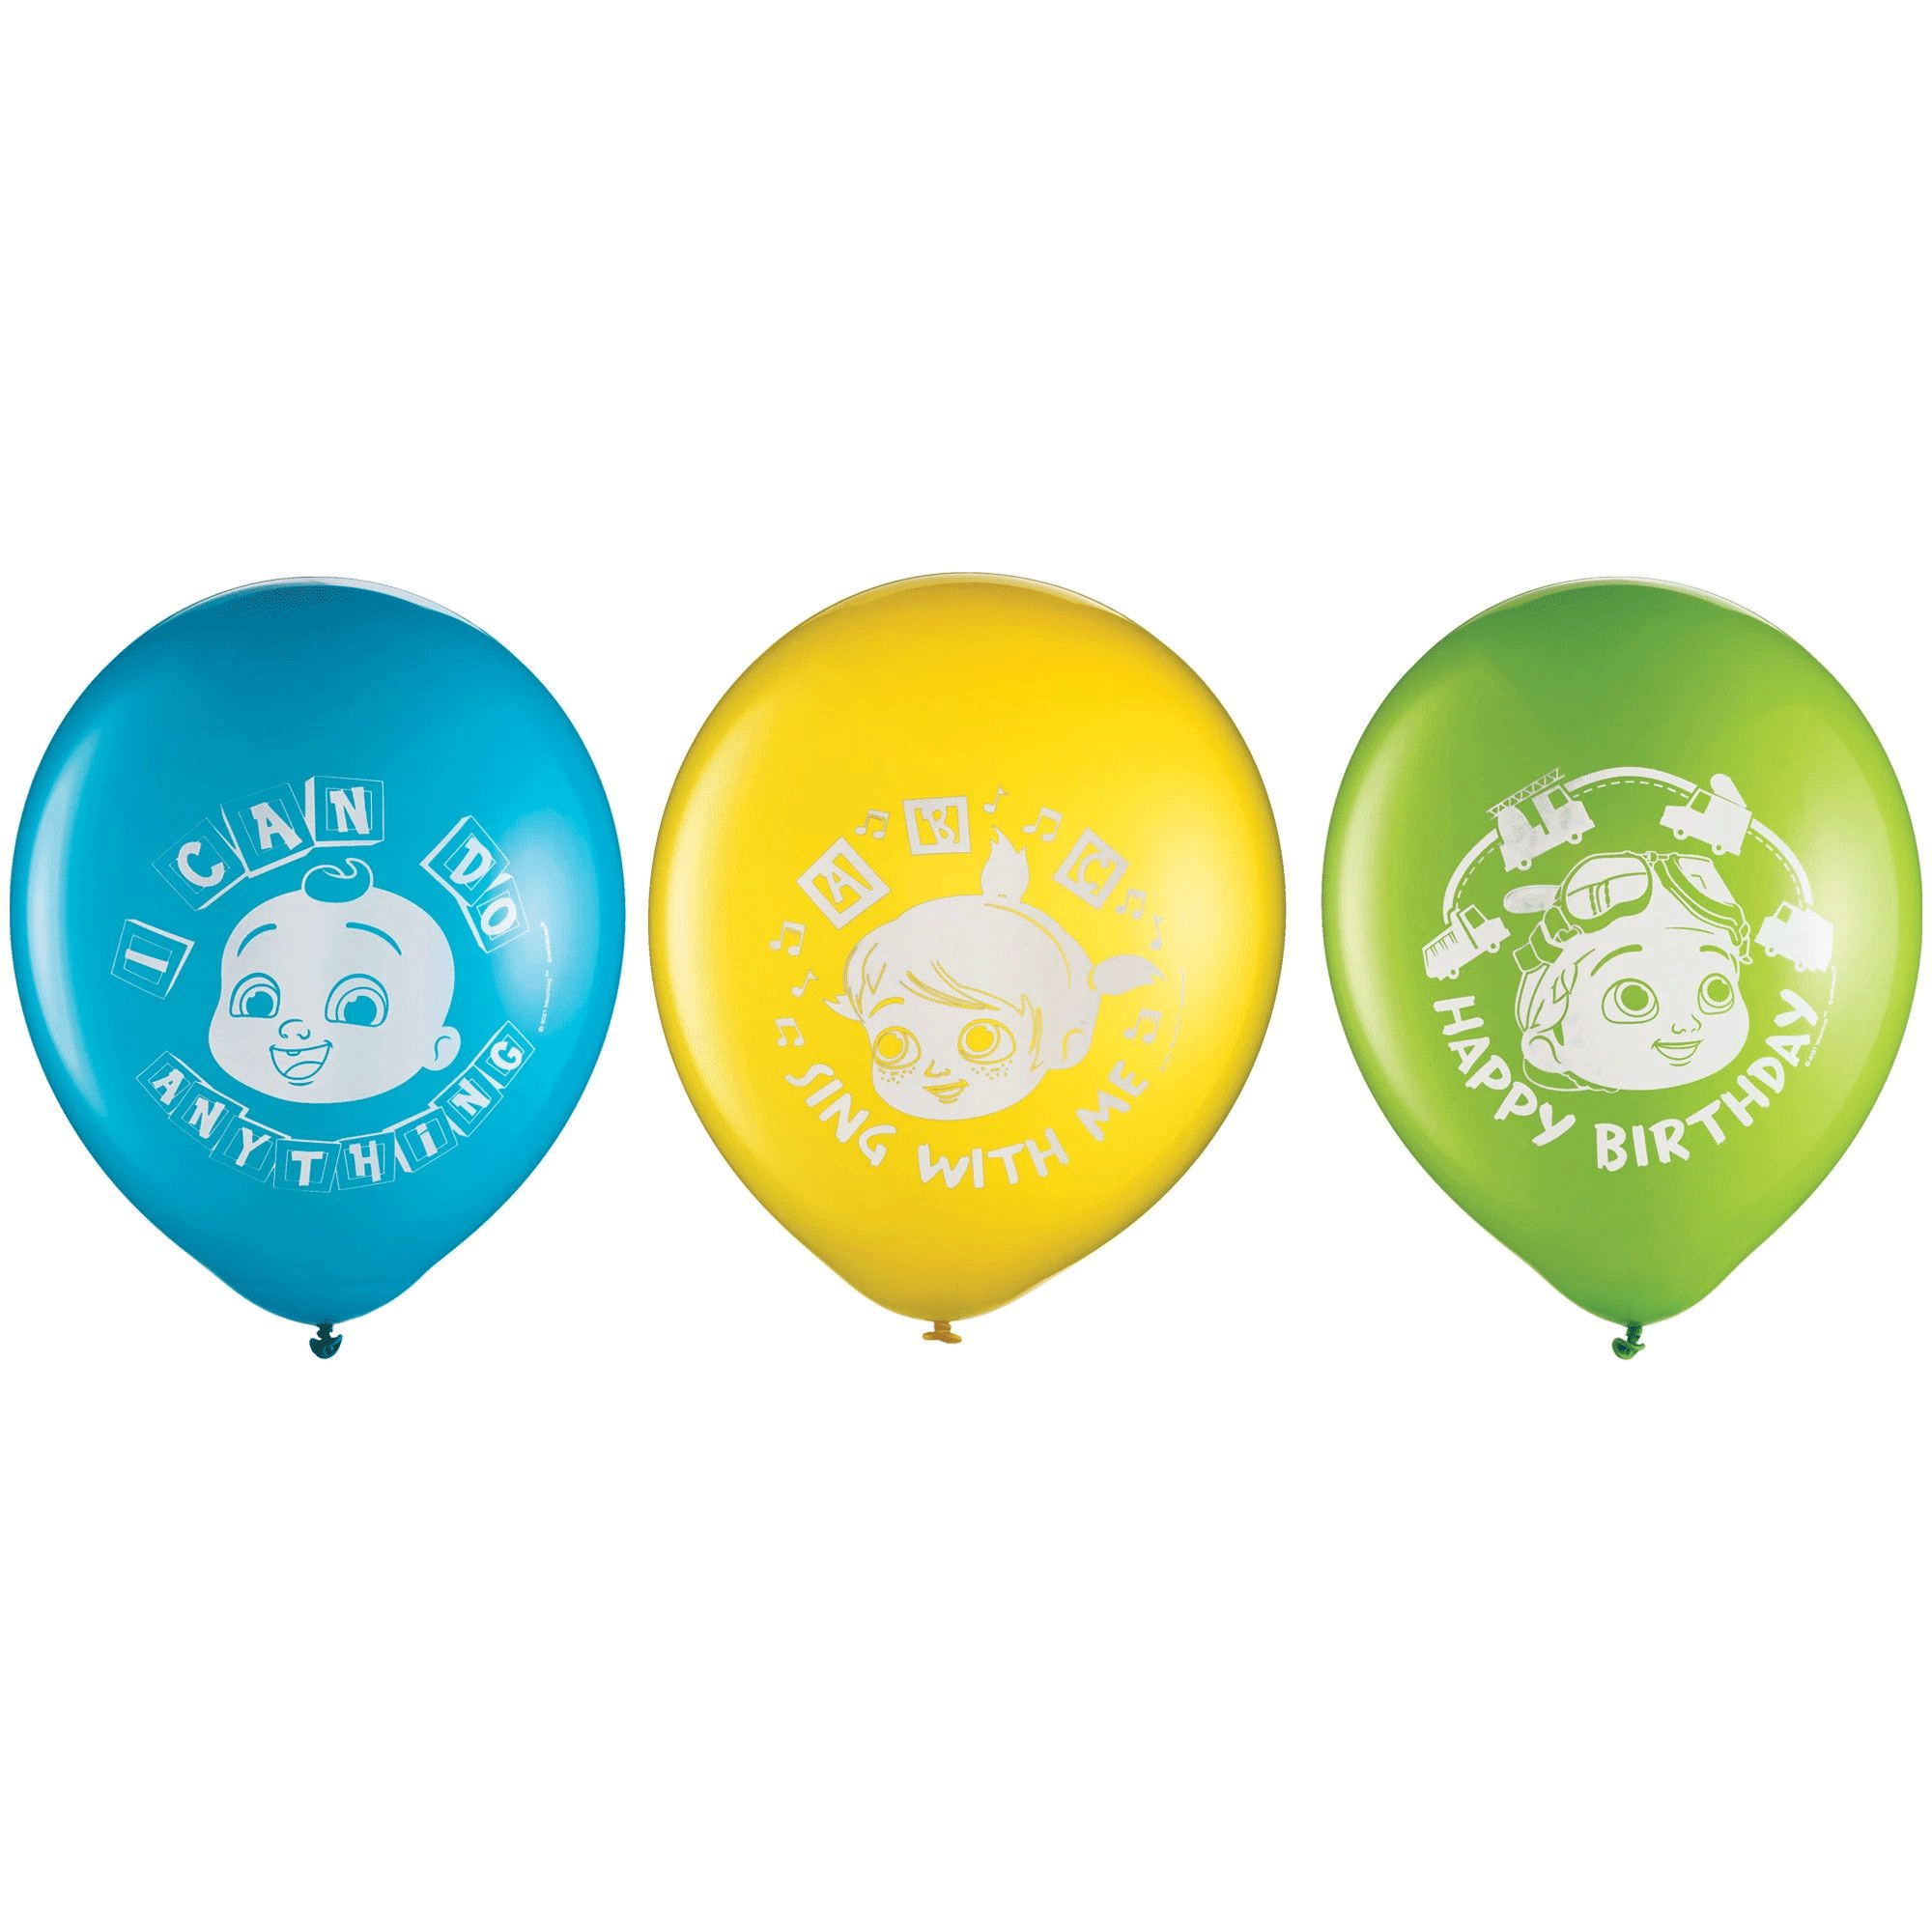 Cocomelon Printed Latex Balloons Assorted 6pcs